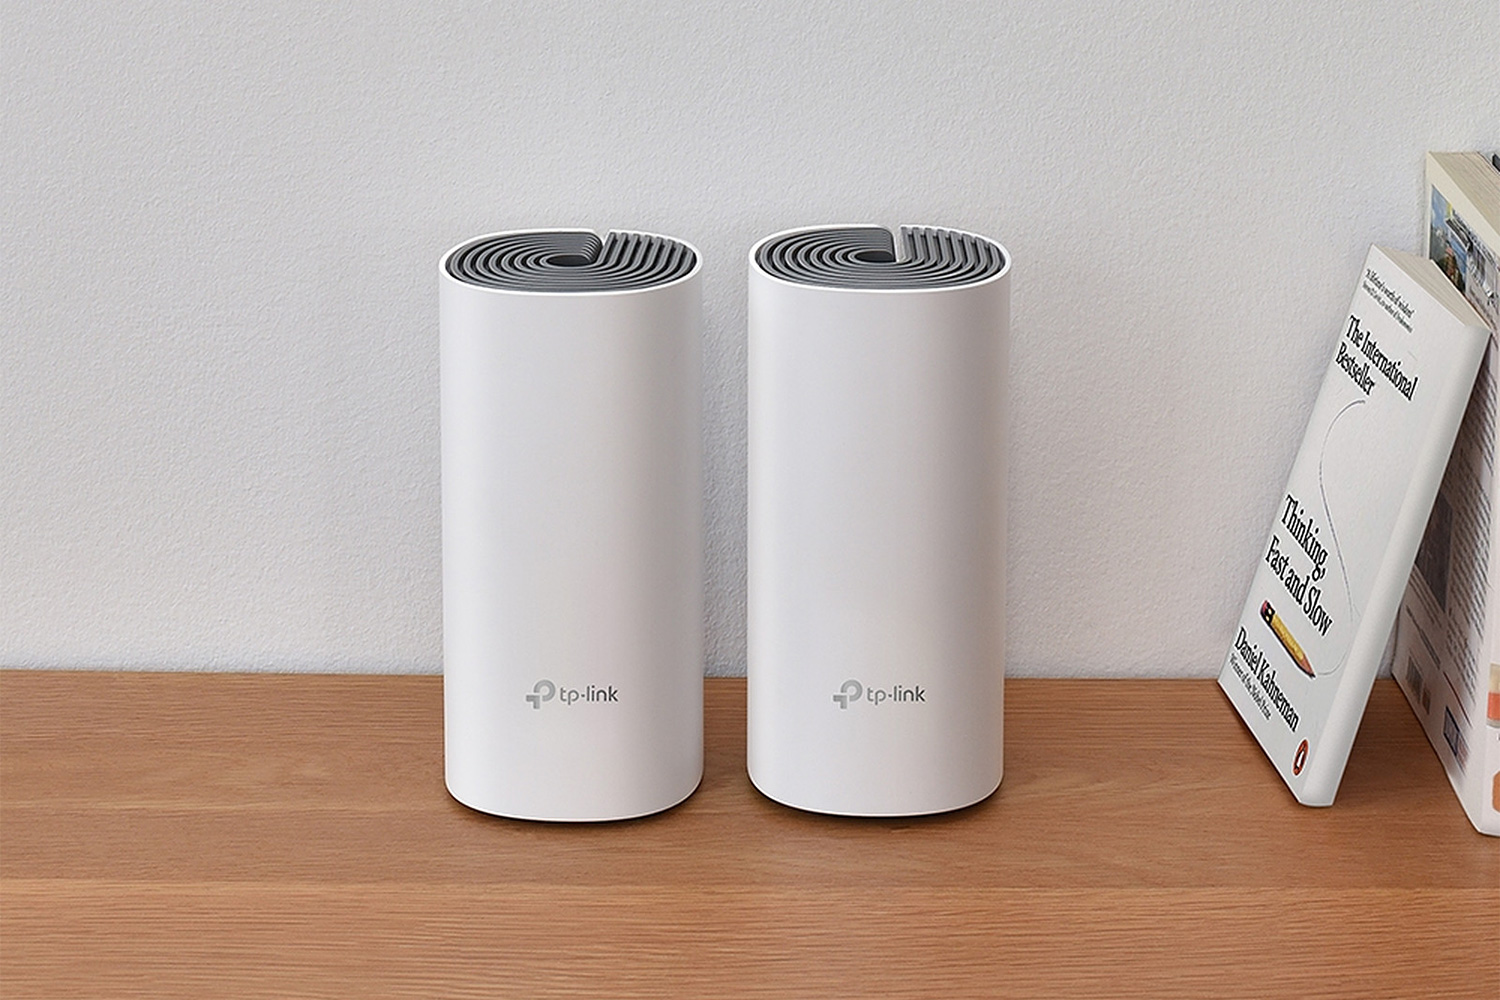 TP-Link Deco W2400 Offers High-Speed Mesh Networking For Under